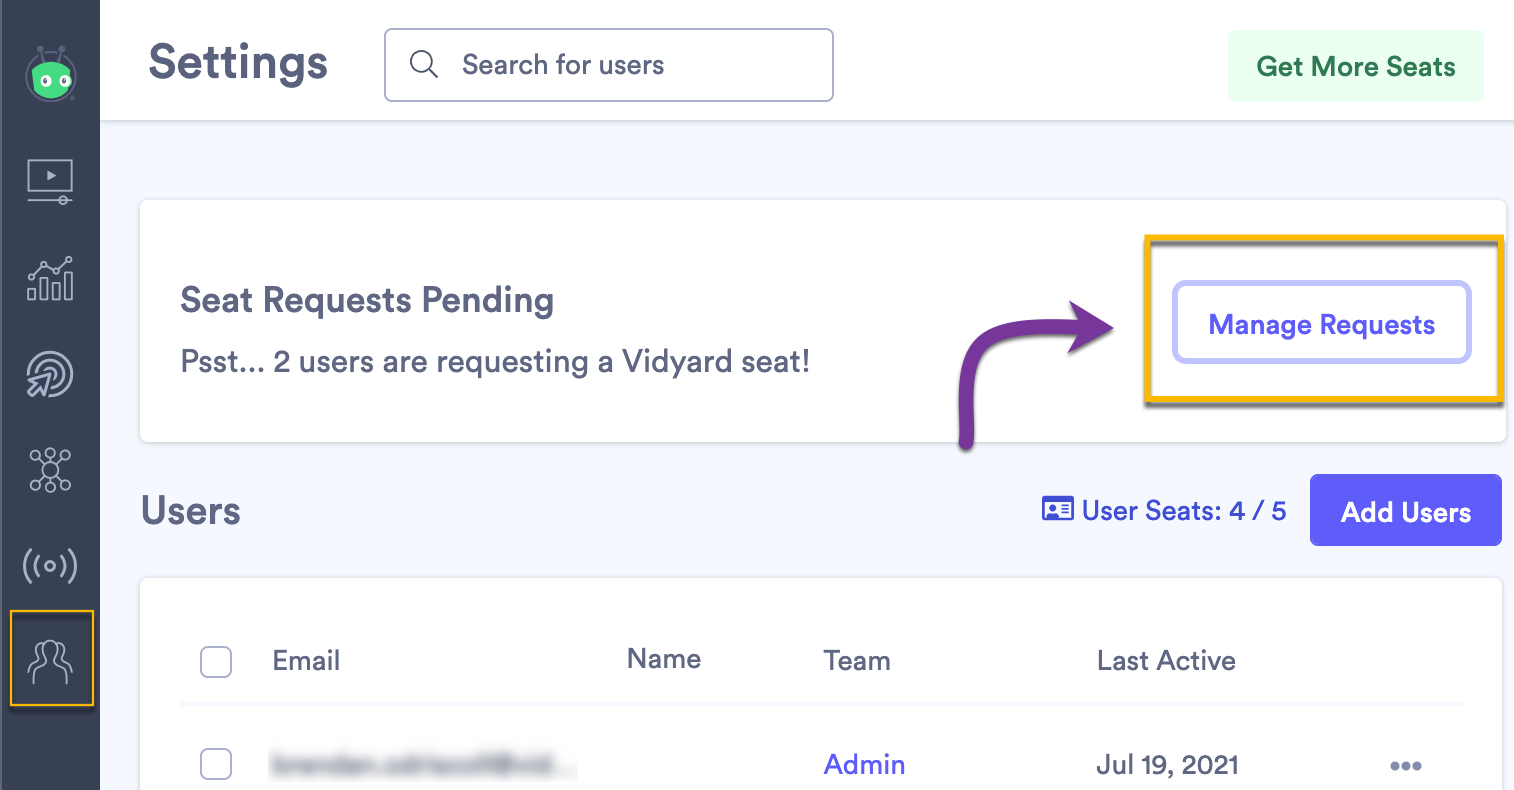 Vidyard user seat request pending section with button to manage incoming requests